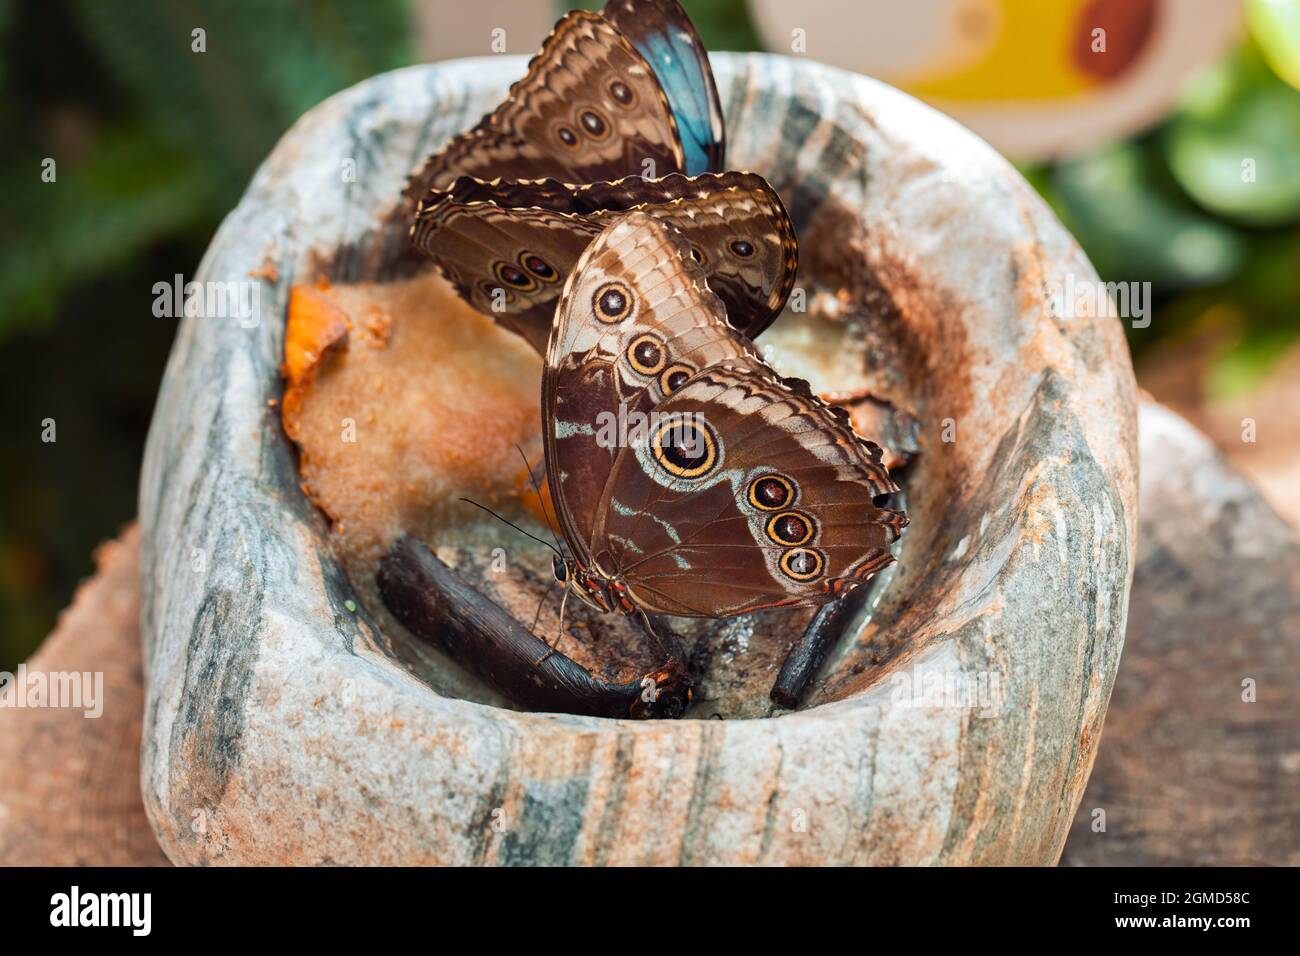 Two beautiful blue Morpho peleides butterfly from Nymphalidae family eating nectar of rotten fruits in a stone mortar on a stump in Konya tropical but Stock Photo